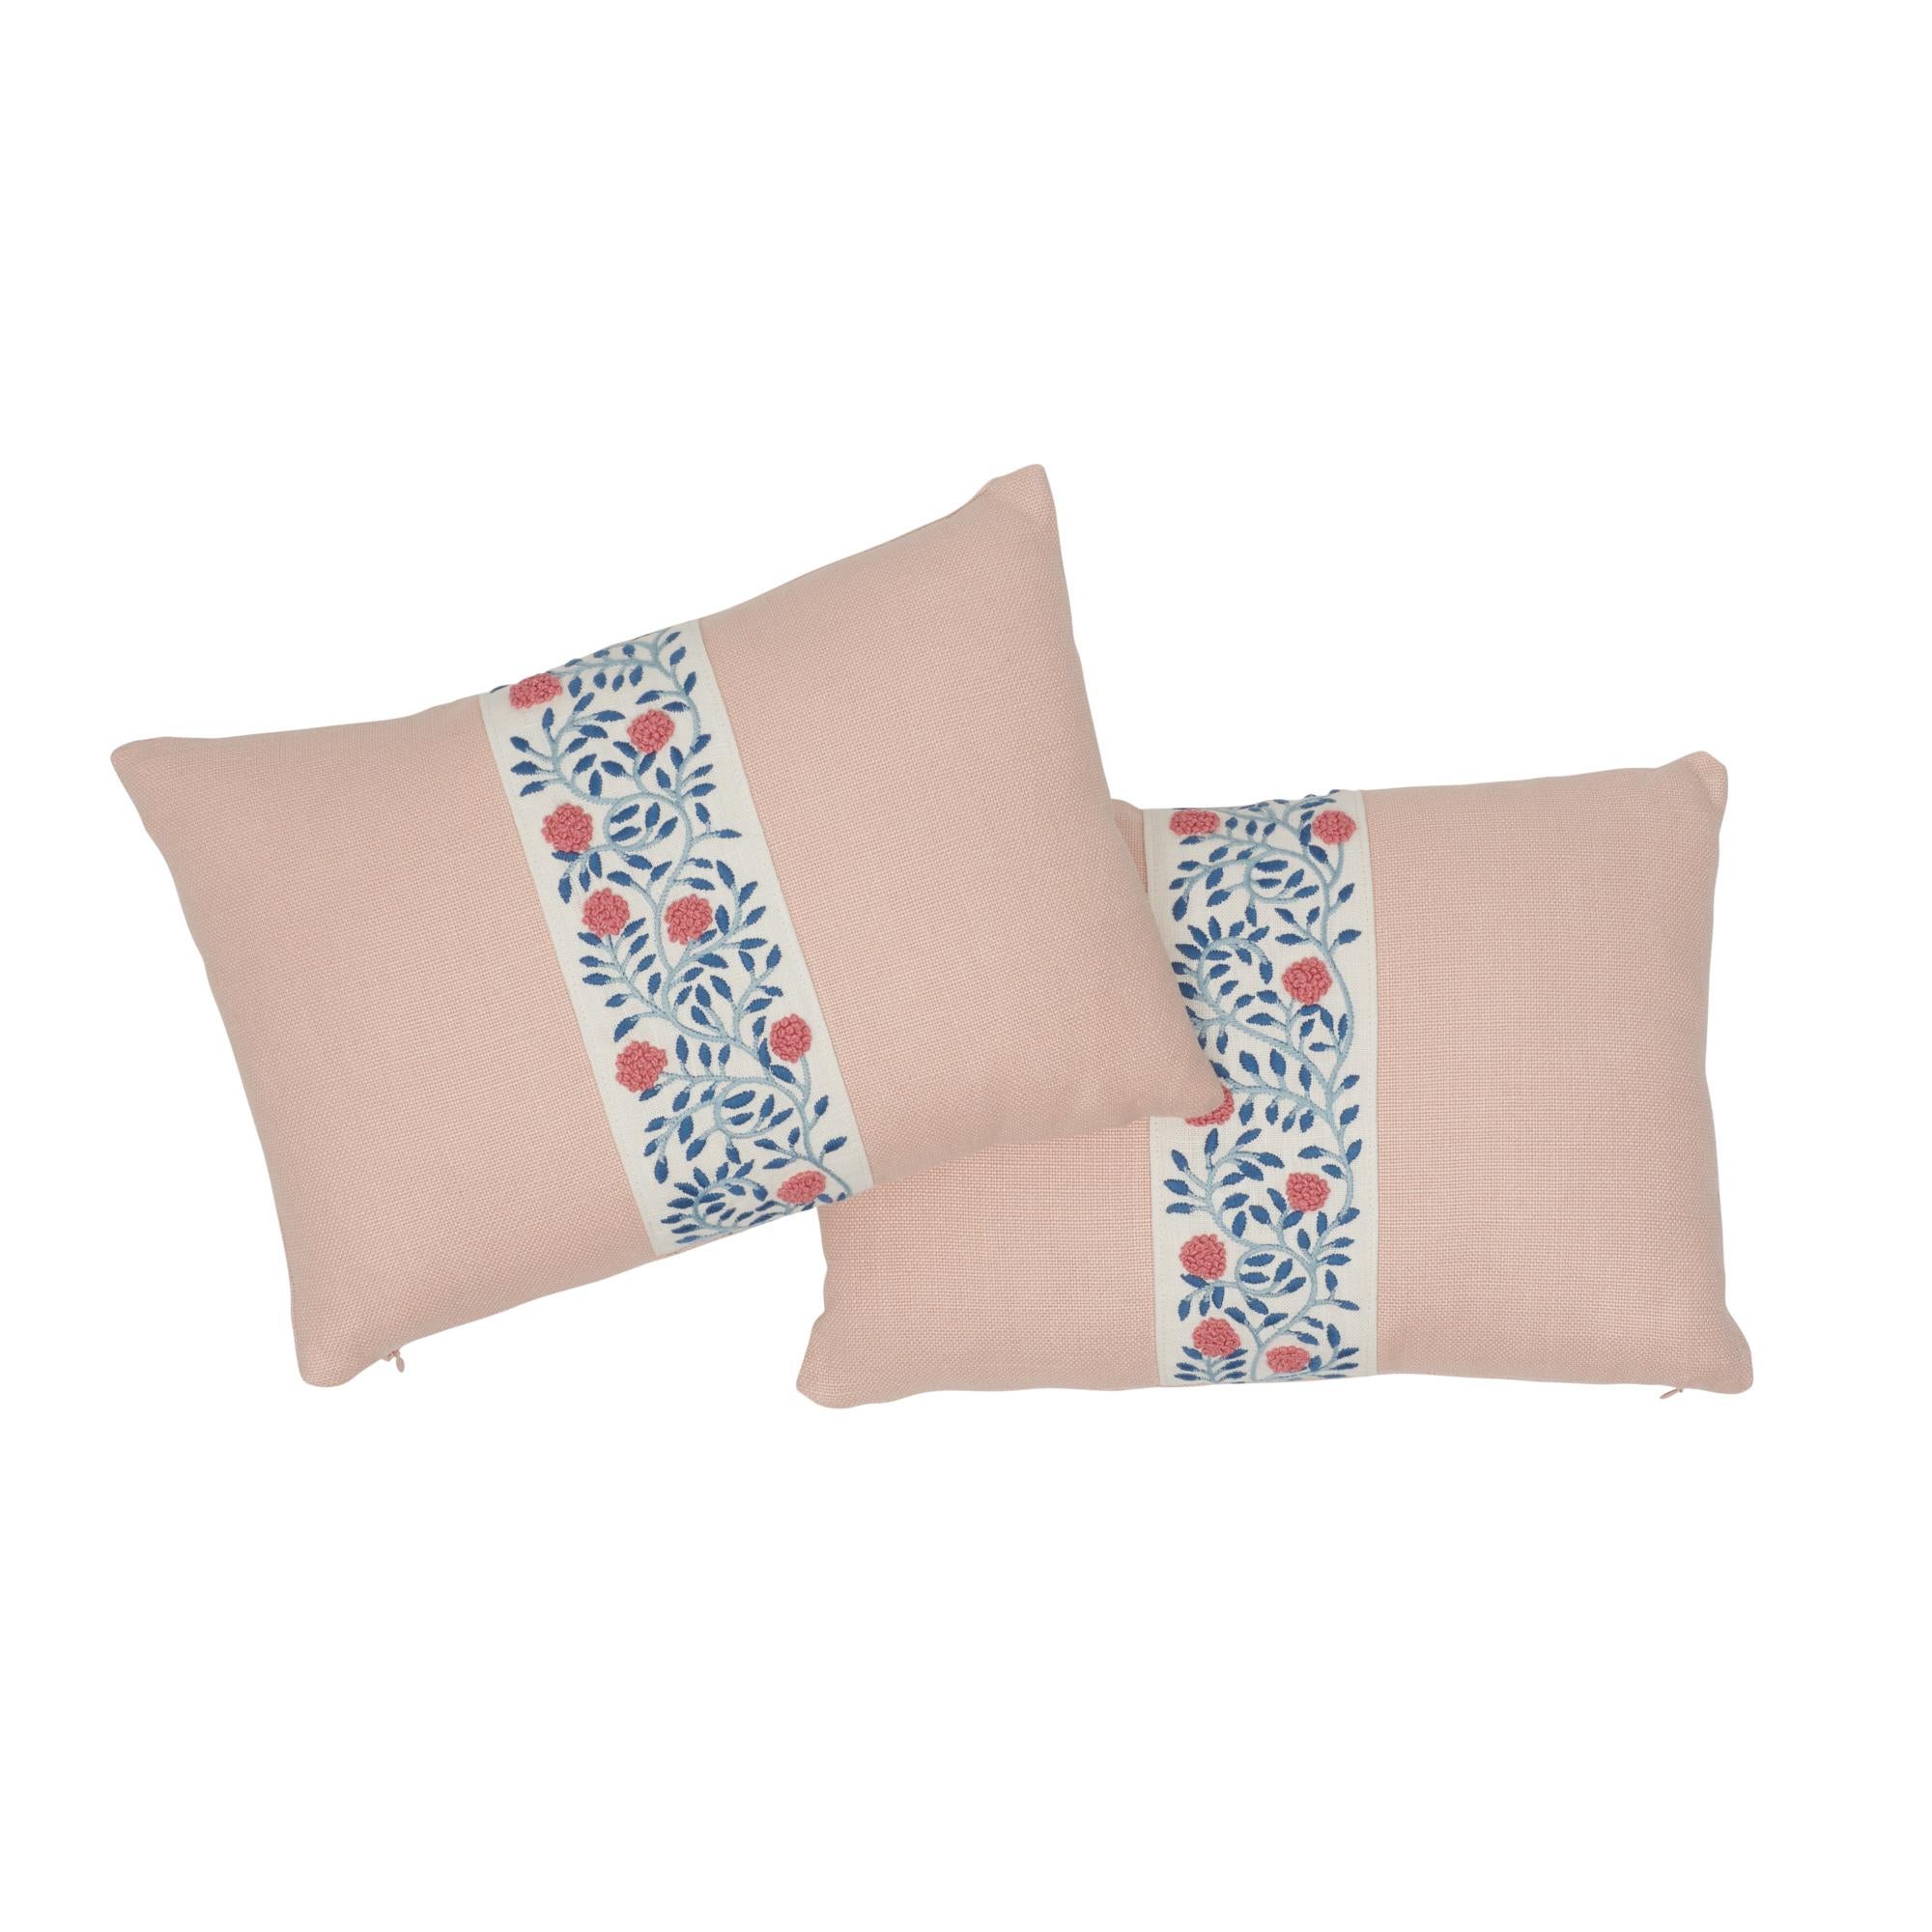 Schumacher Ashoka Lumbar Pillow in Rose Quartz In New Condition For Sale In New York, NY